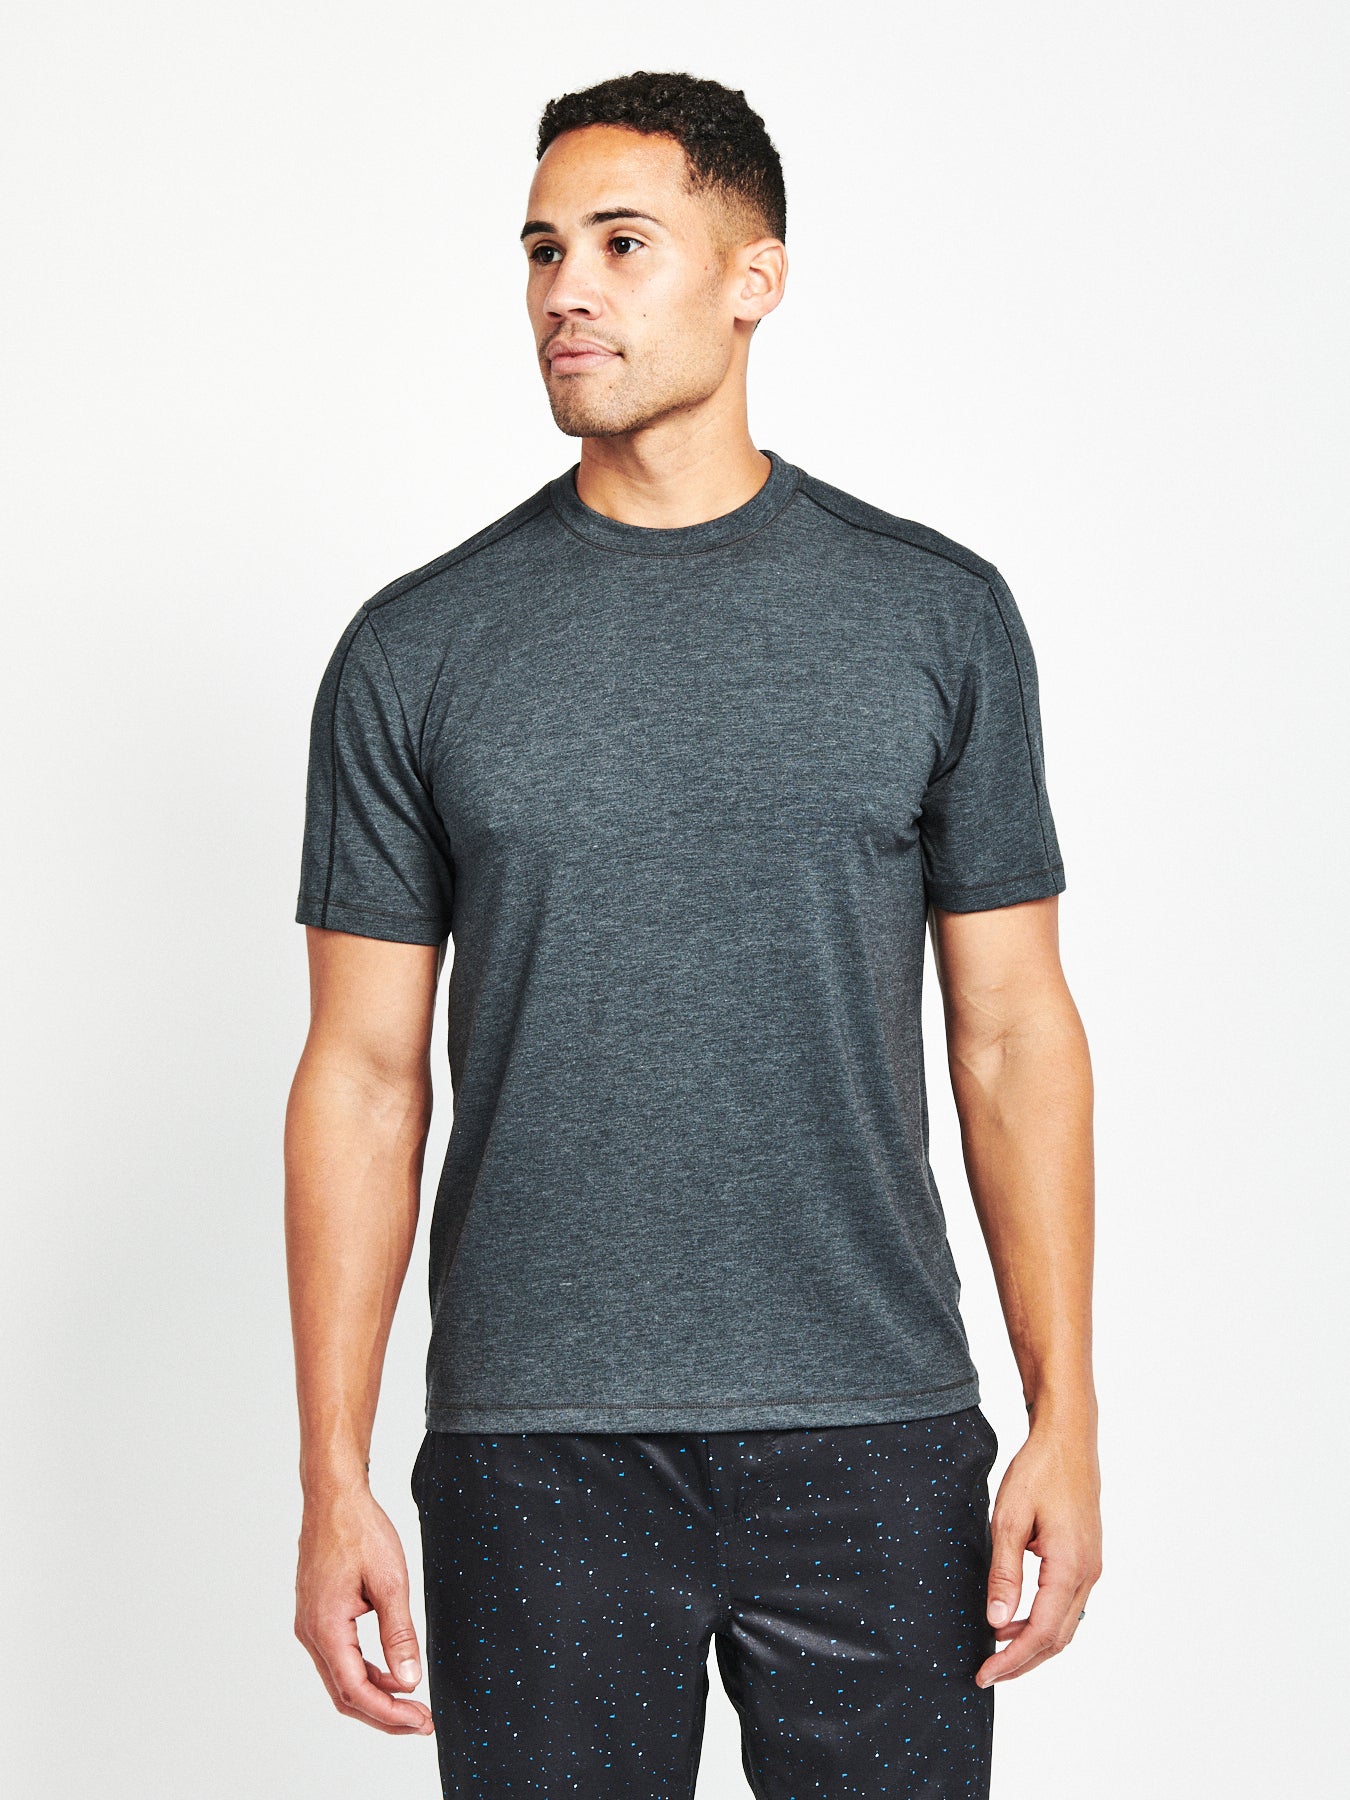 15 Best Workout Shirts for Men in 2024 That Are Stylish and Comfy